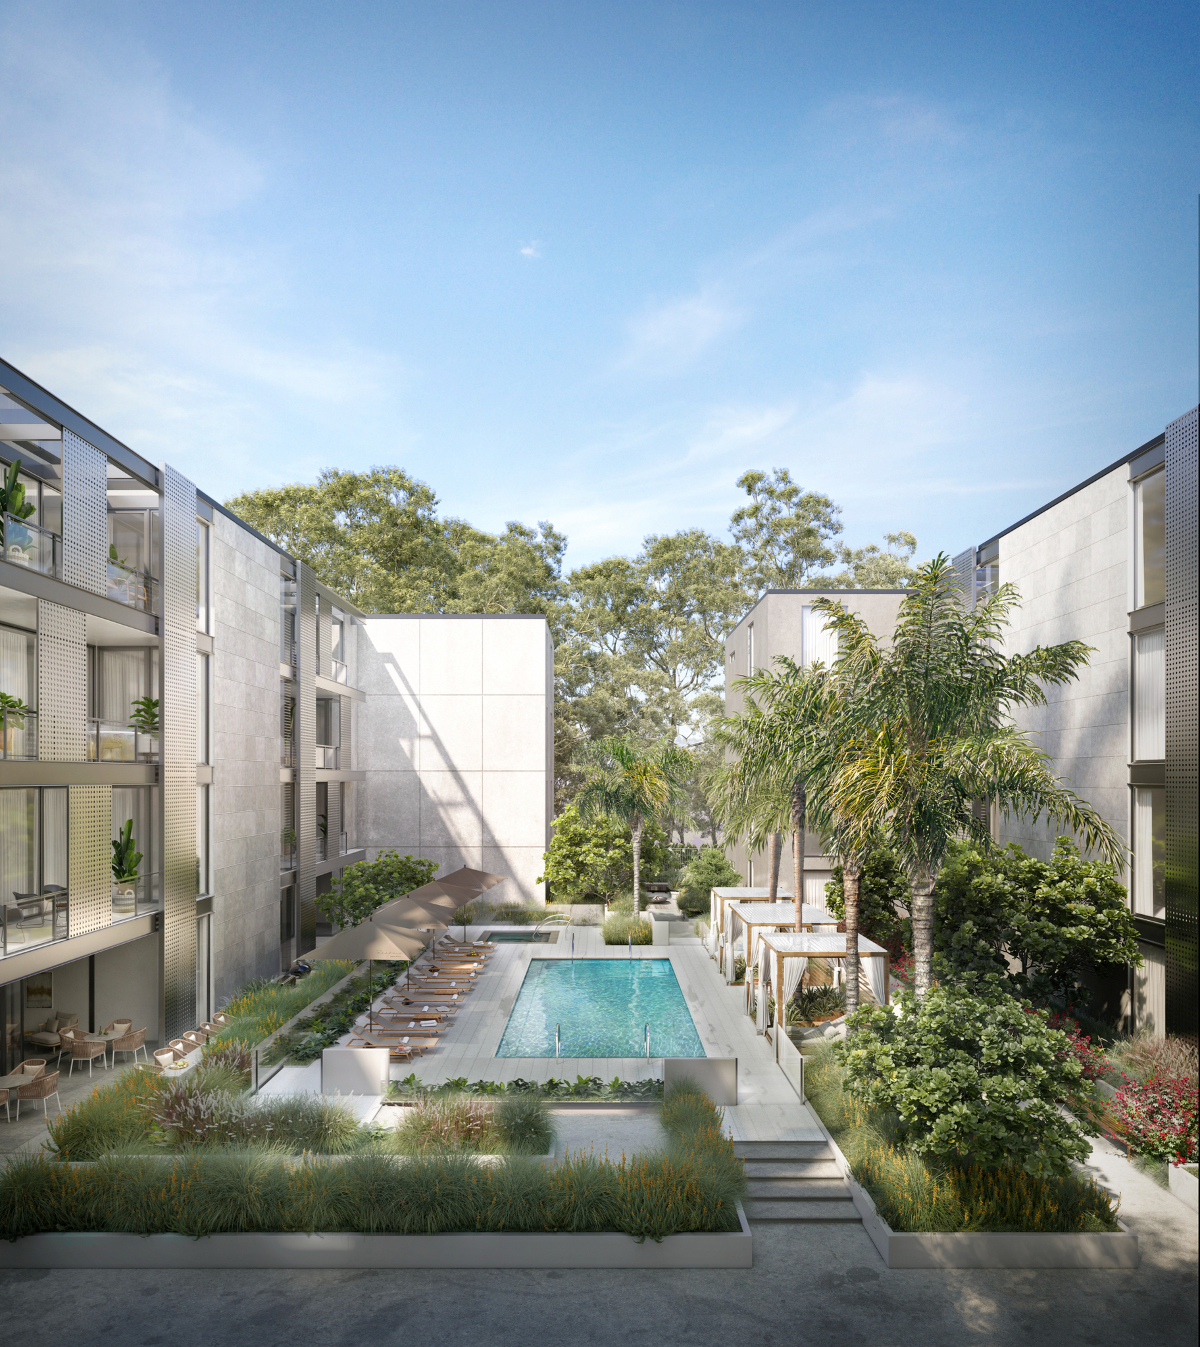 PRESS RELEASE: Brentwood's Newest Curated Living Experience & Residences